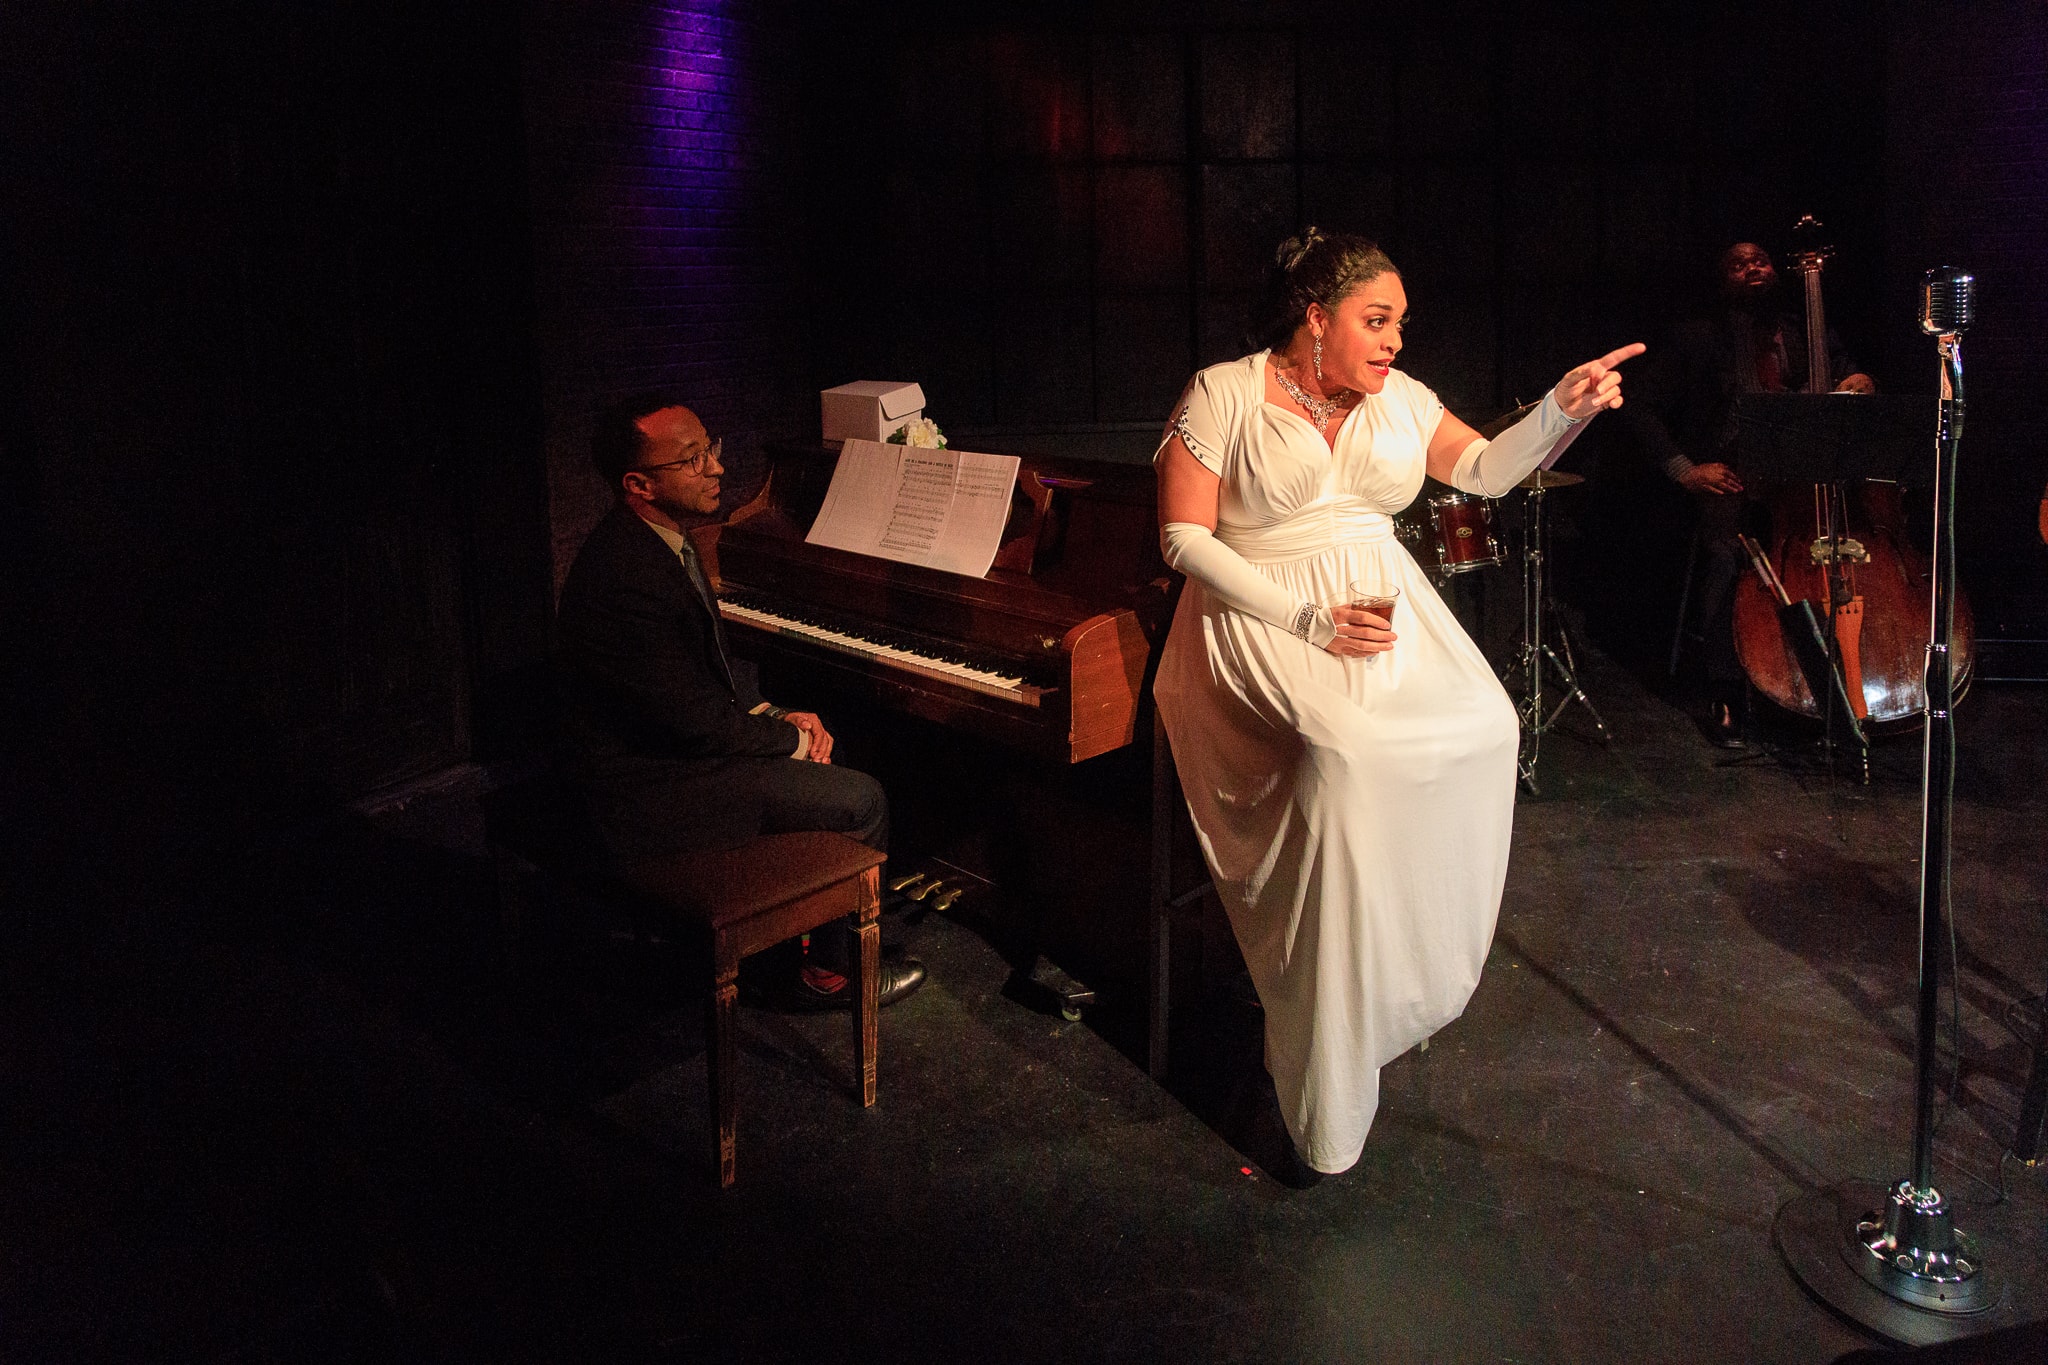 Mark Meadows and Iyona Blake in Lady Day at Emerson's Bar and Grill. Photo by Keith Waters Kx Photography.